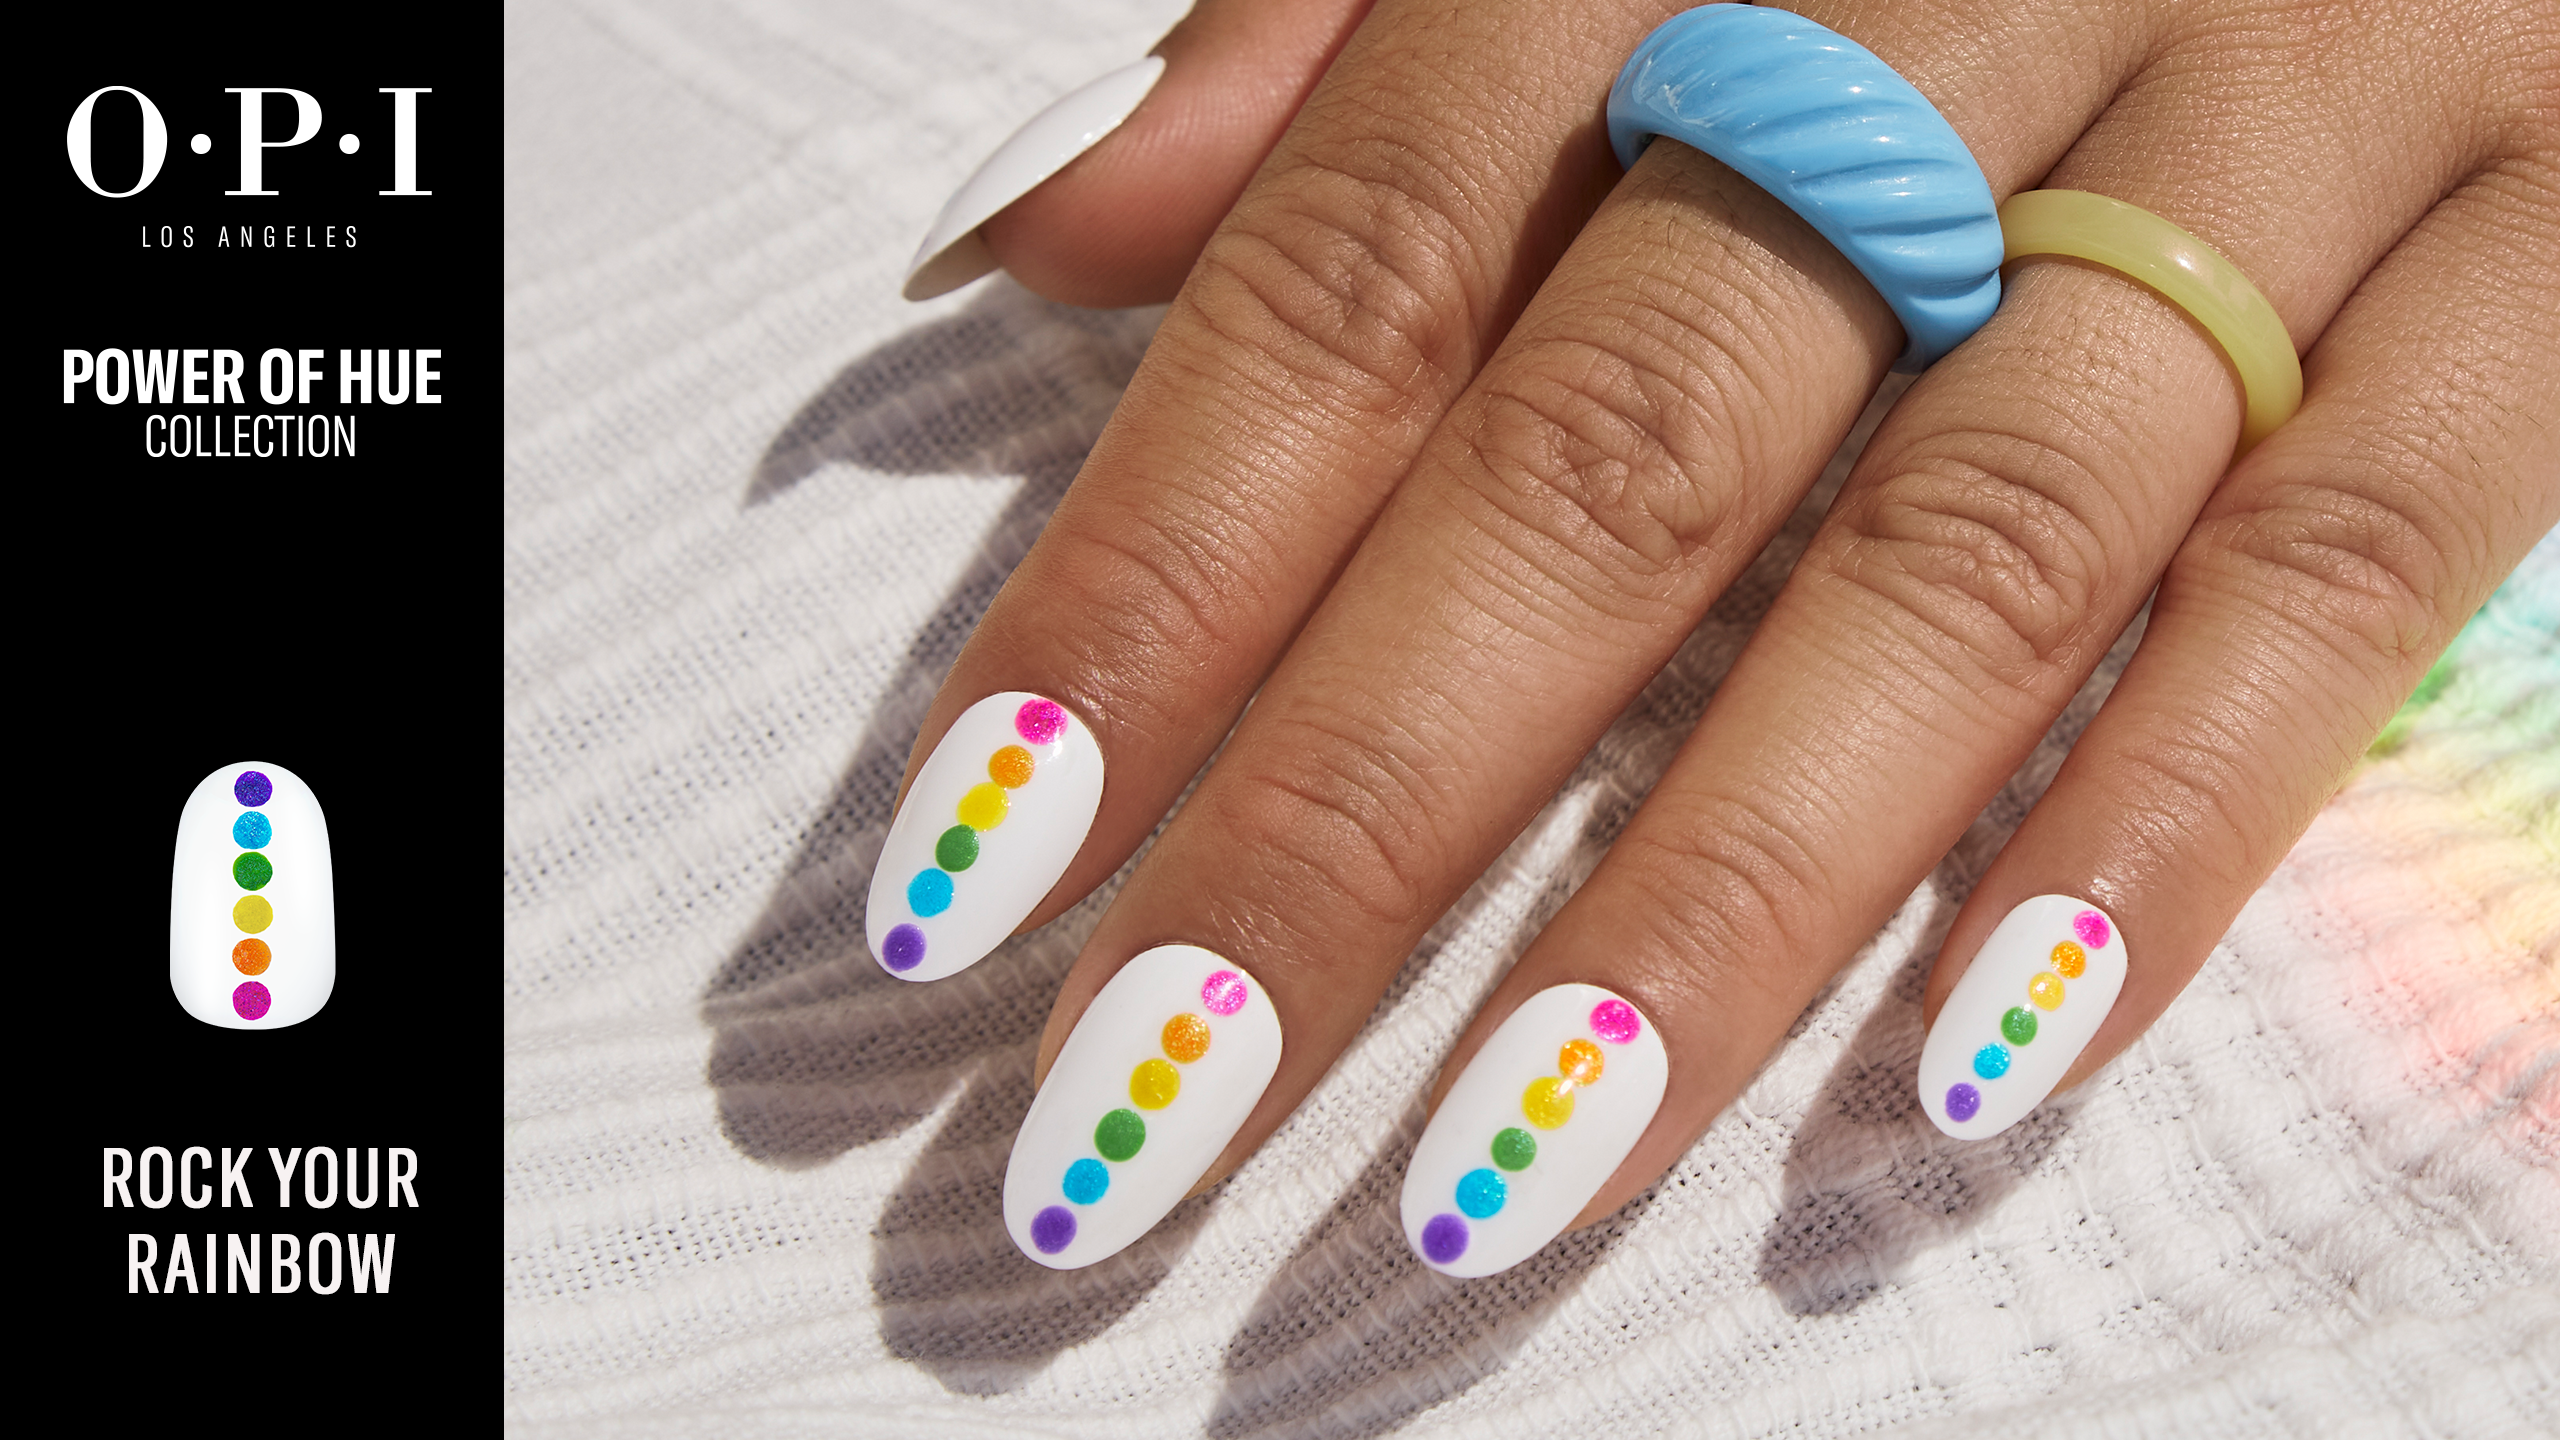 Rock Your Rainbow: Power of Hue Collection Nail Art